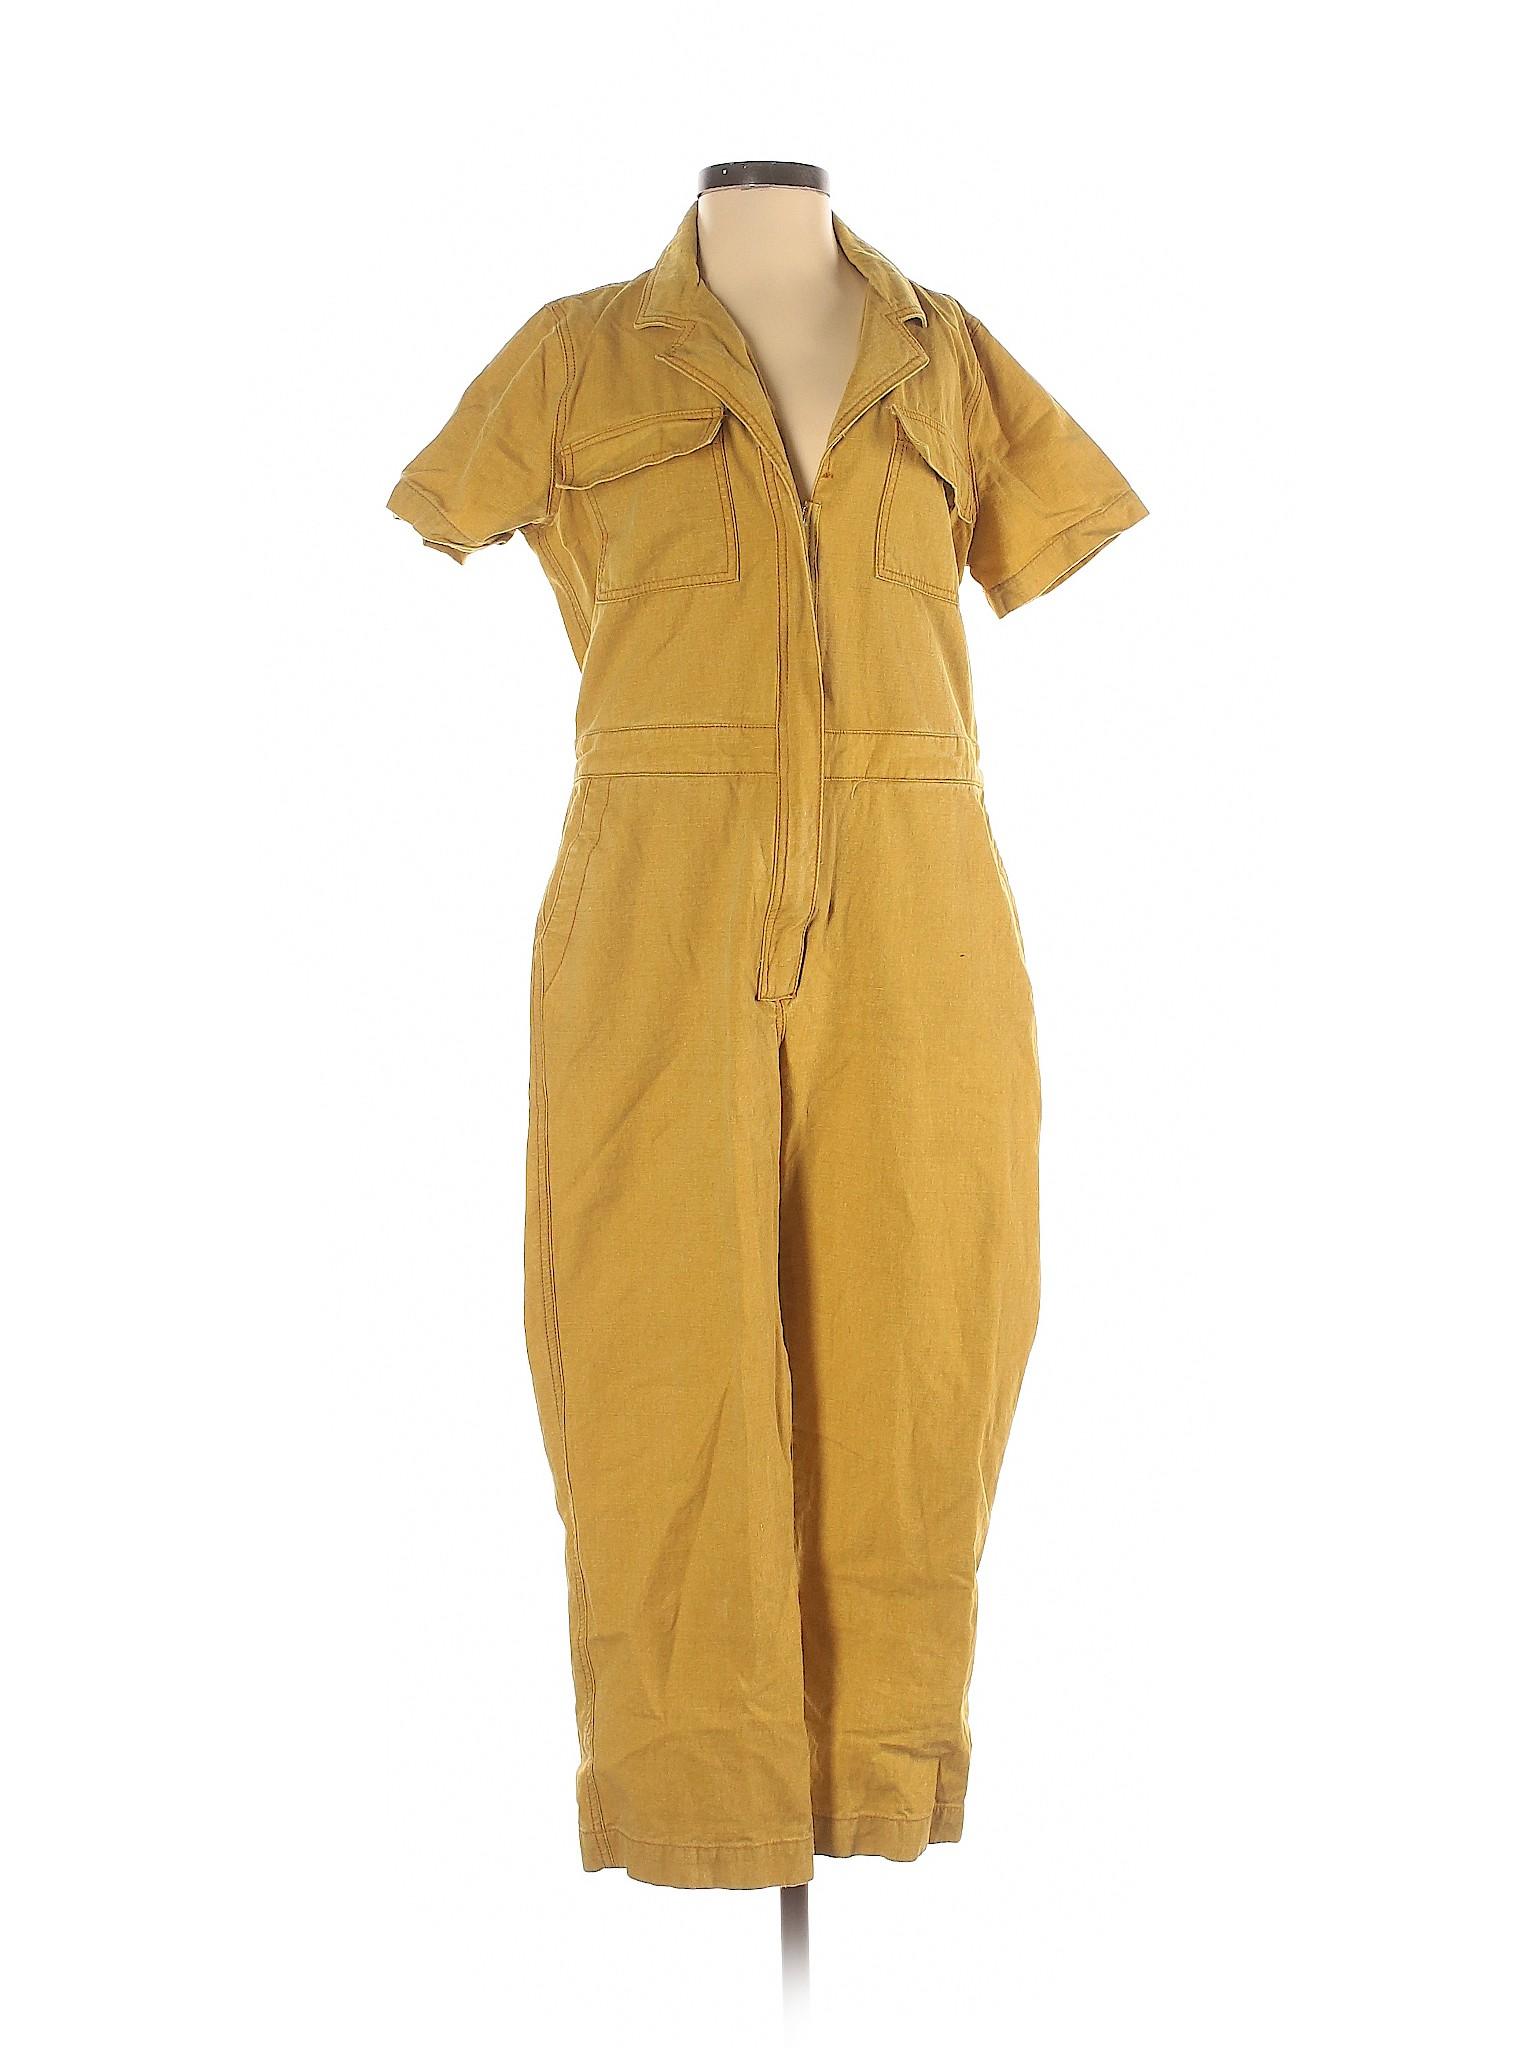 Moon River Jumpsuit, $33 ($10 off with our special link - click image!) @thredup.com